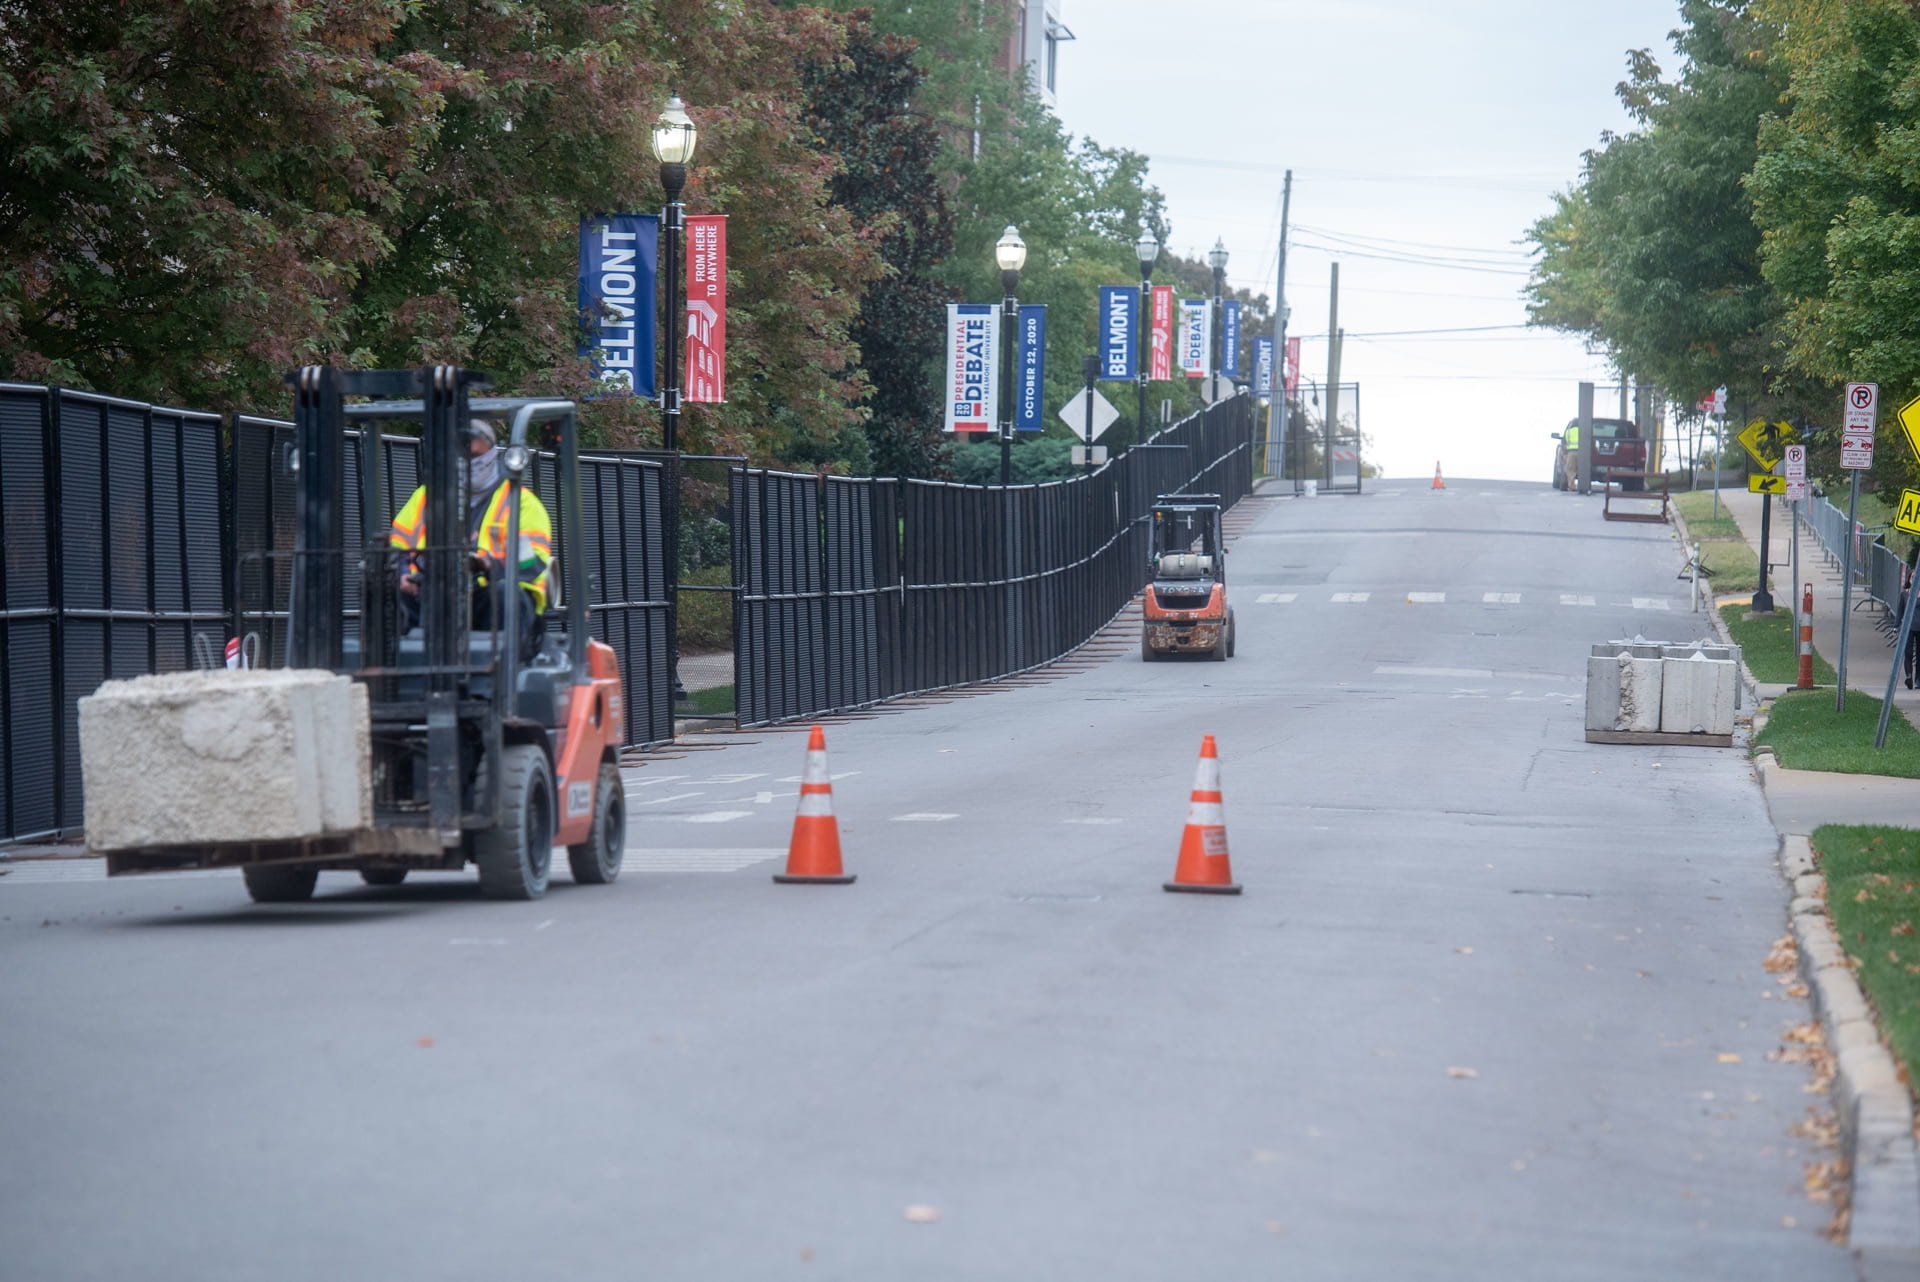 7,120 Linear Feet of “No passthrough” fencing set up around campus